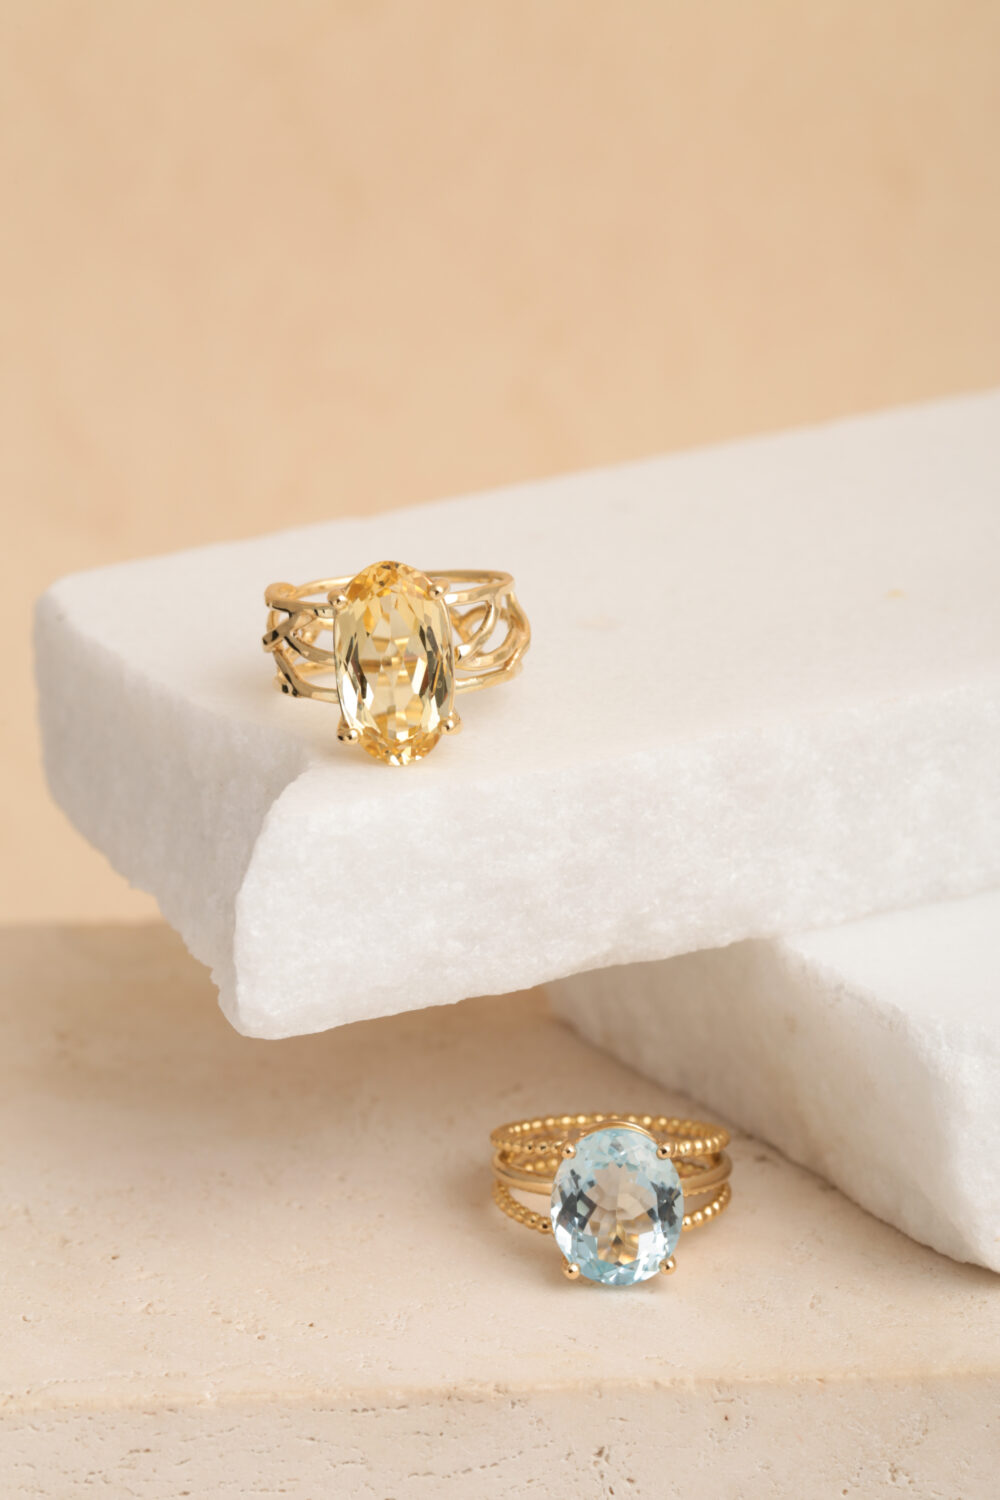 Ring in yellow gold set with an oval cut, light yellow Citrine gemstone. All our jewellery is handmade by Pascale Masselis in our Antwerp based atelier.